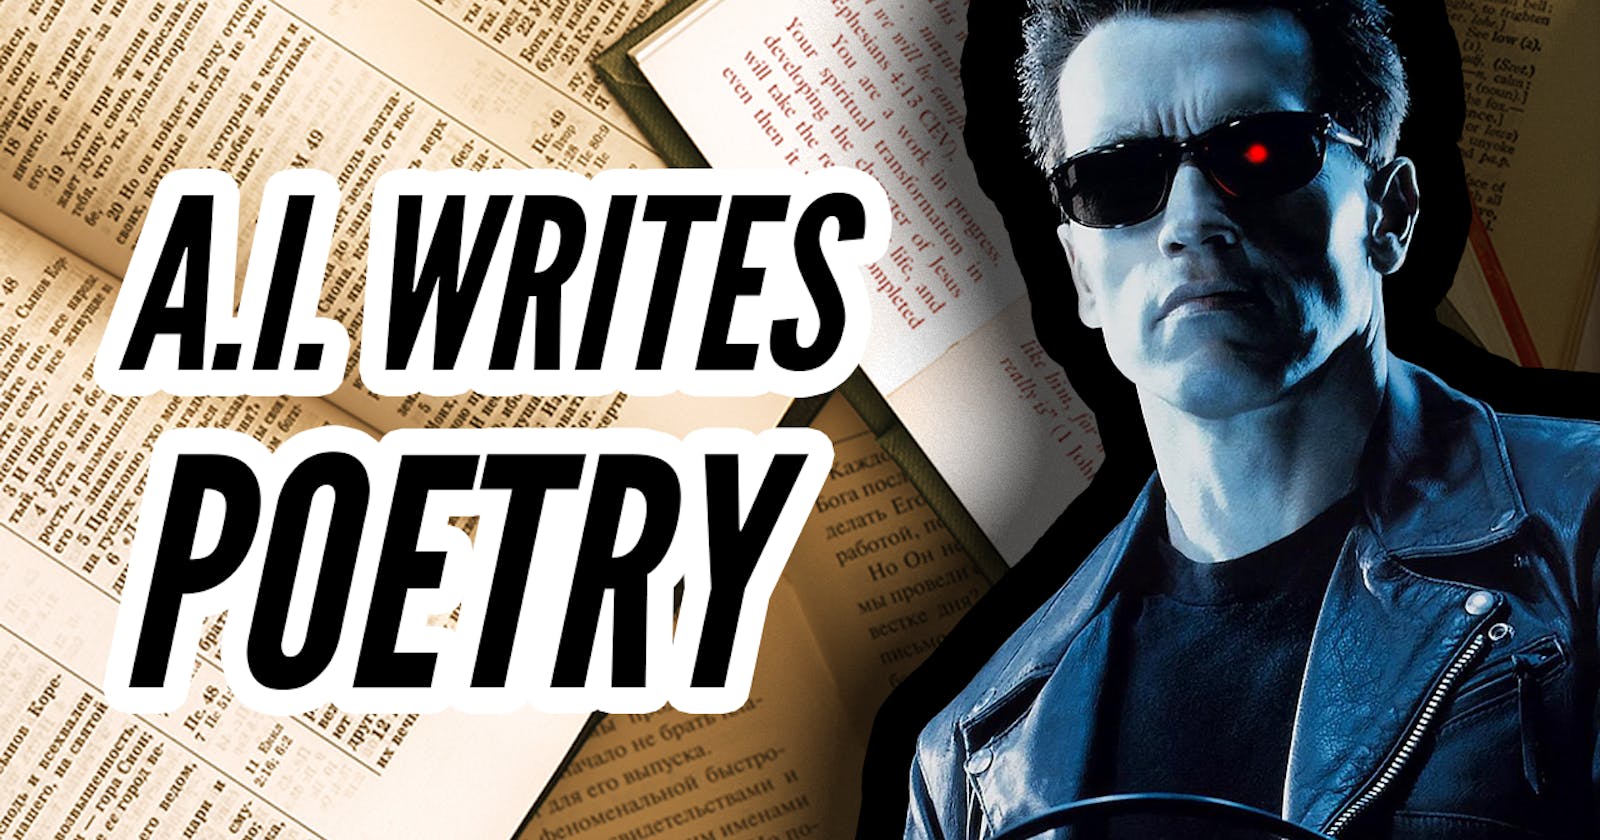 T-800 meets Shakespeare: Using AI to generate poetry